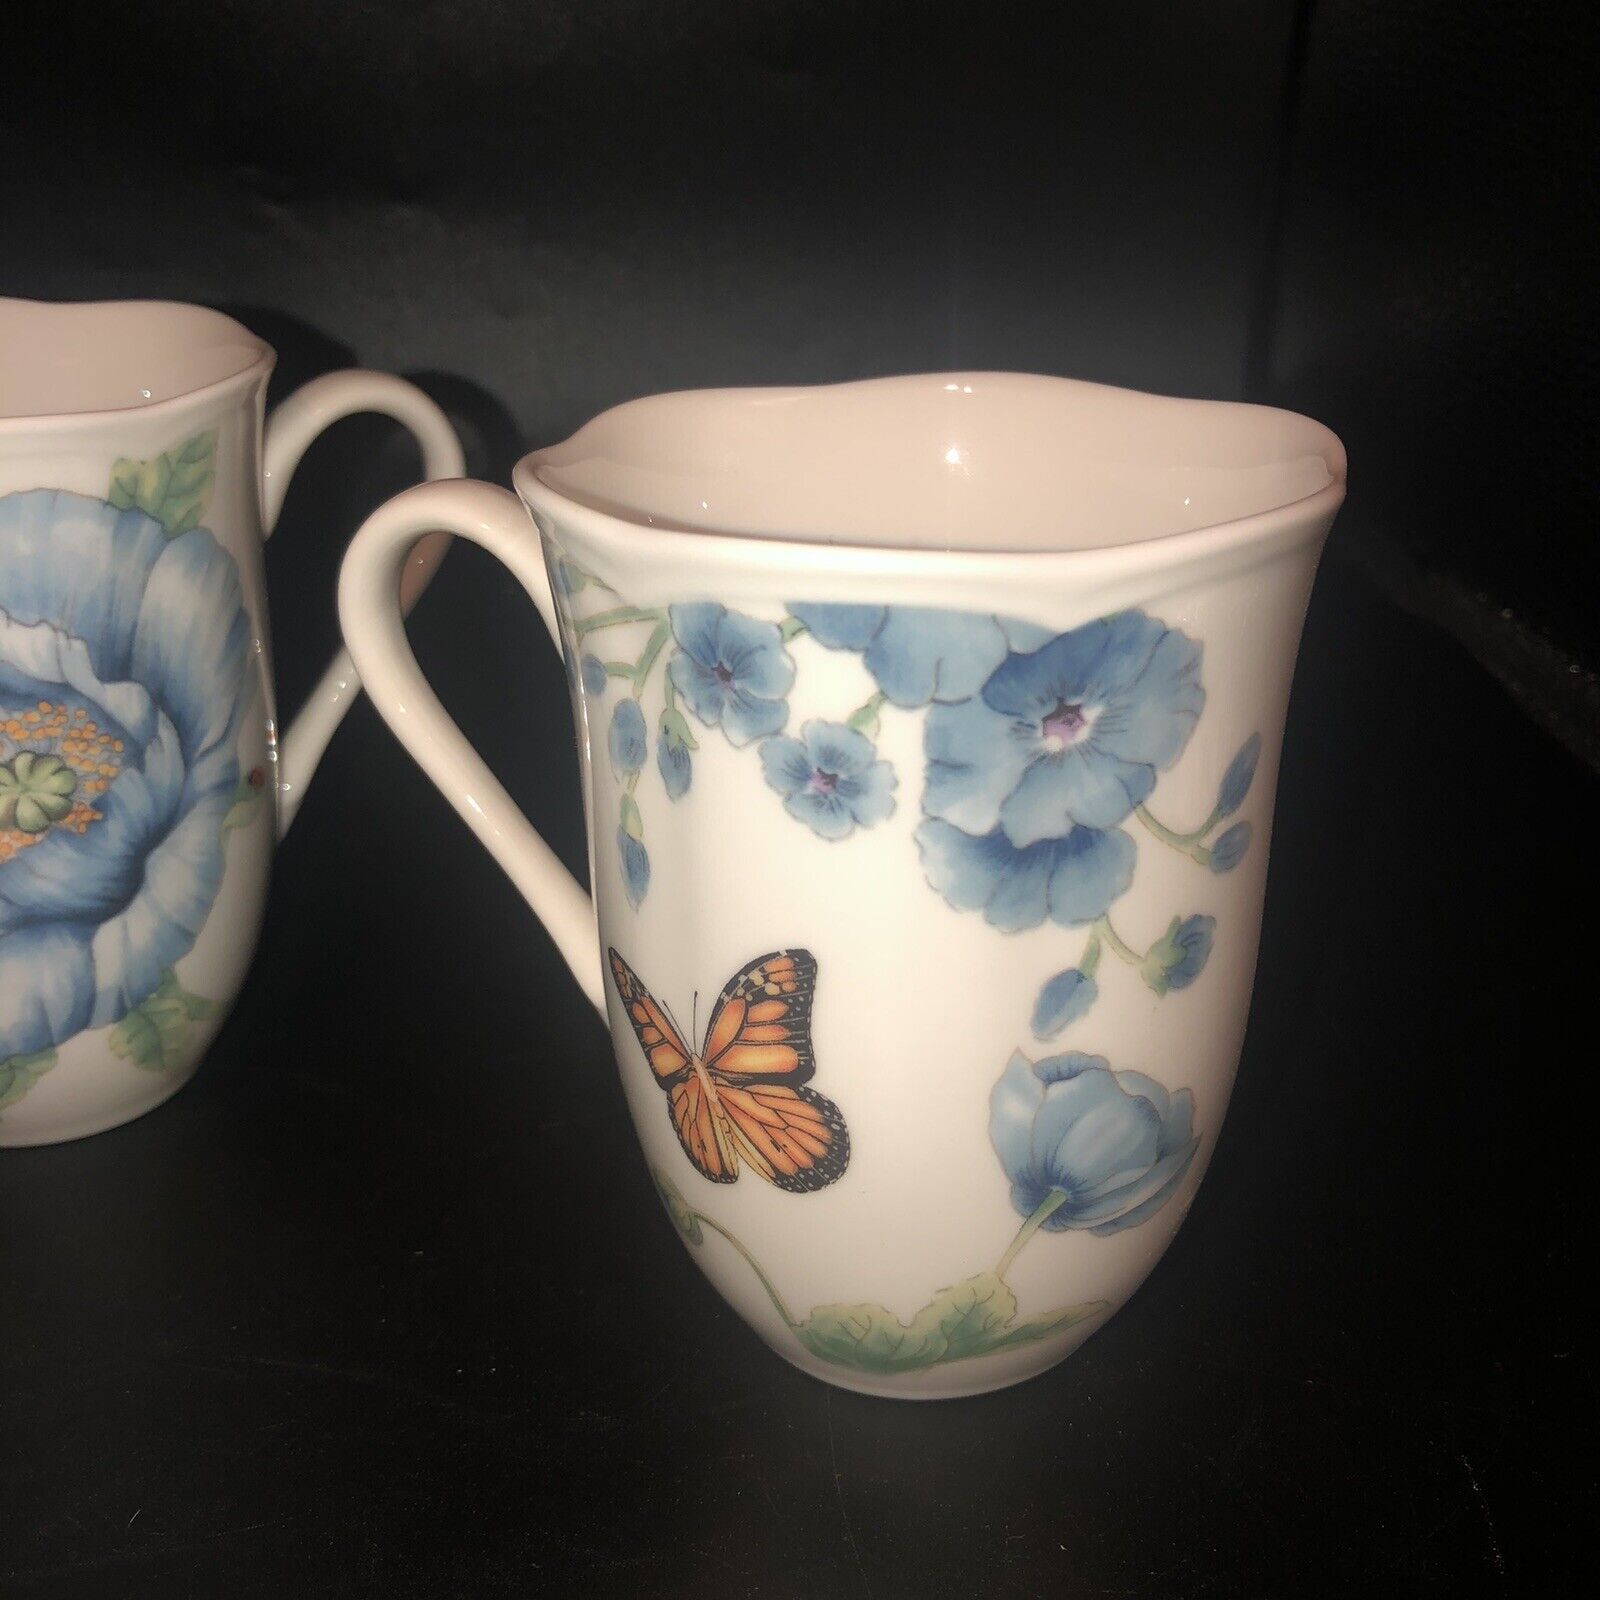 New In Box 4 Mugs Lenox Butterfly Meadows Laurie Le Luyer #2 Nice